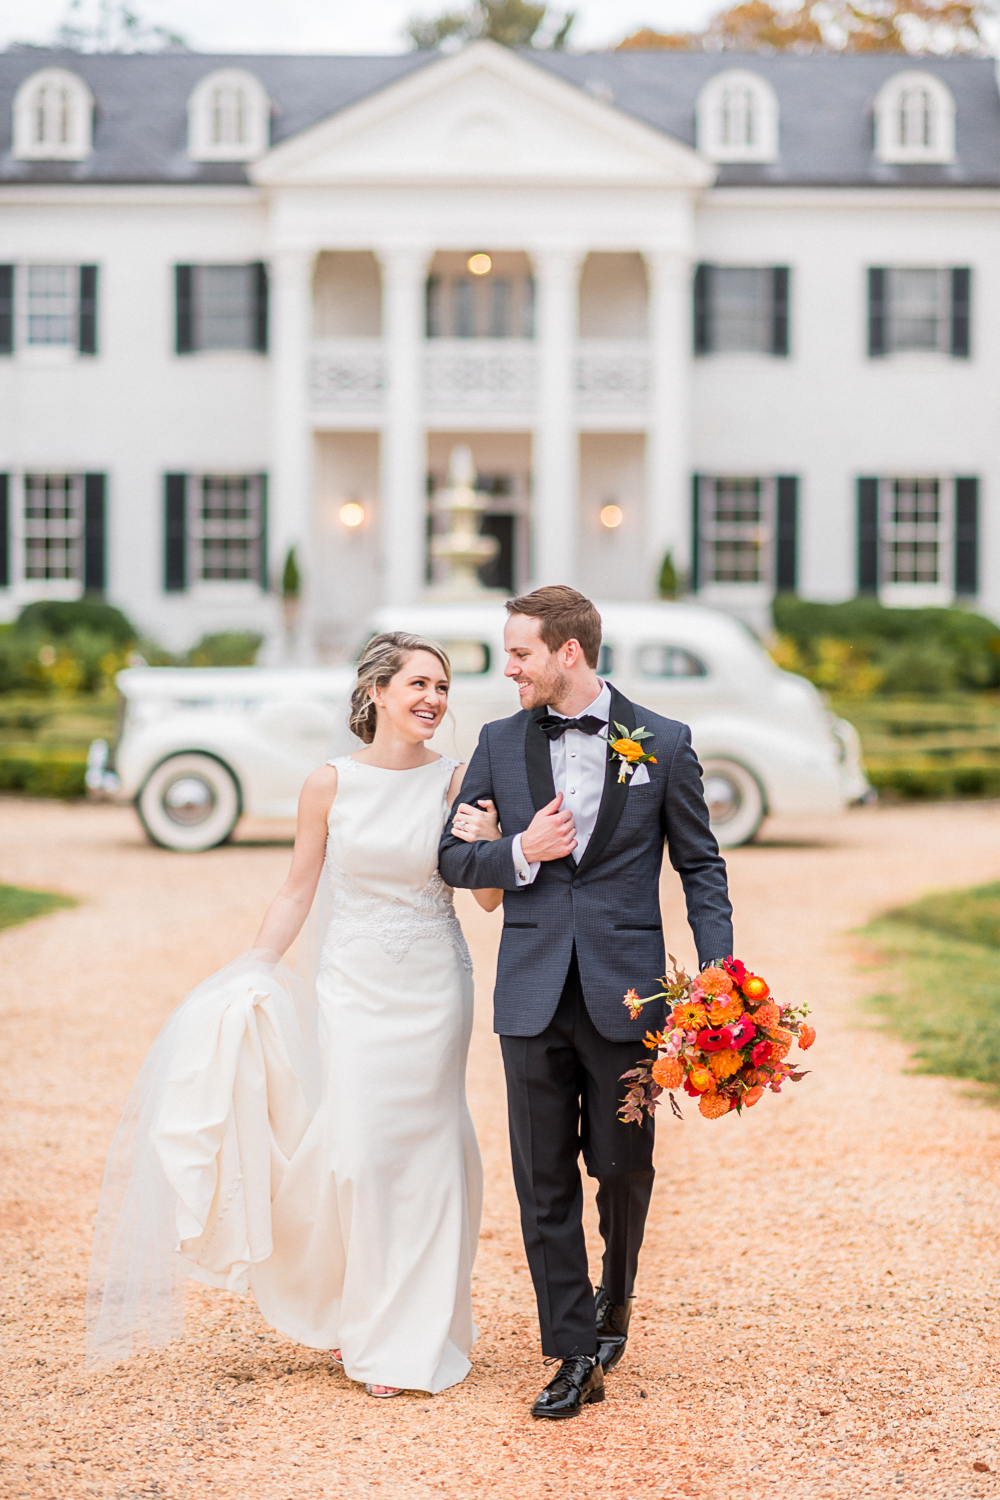 How to Plan Your Wedding Day Timeline 4 - Hunter and Sarah Photography Cover